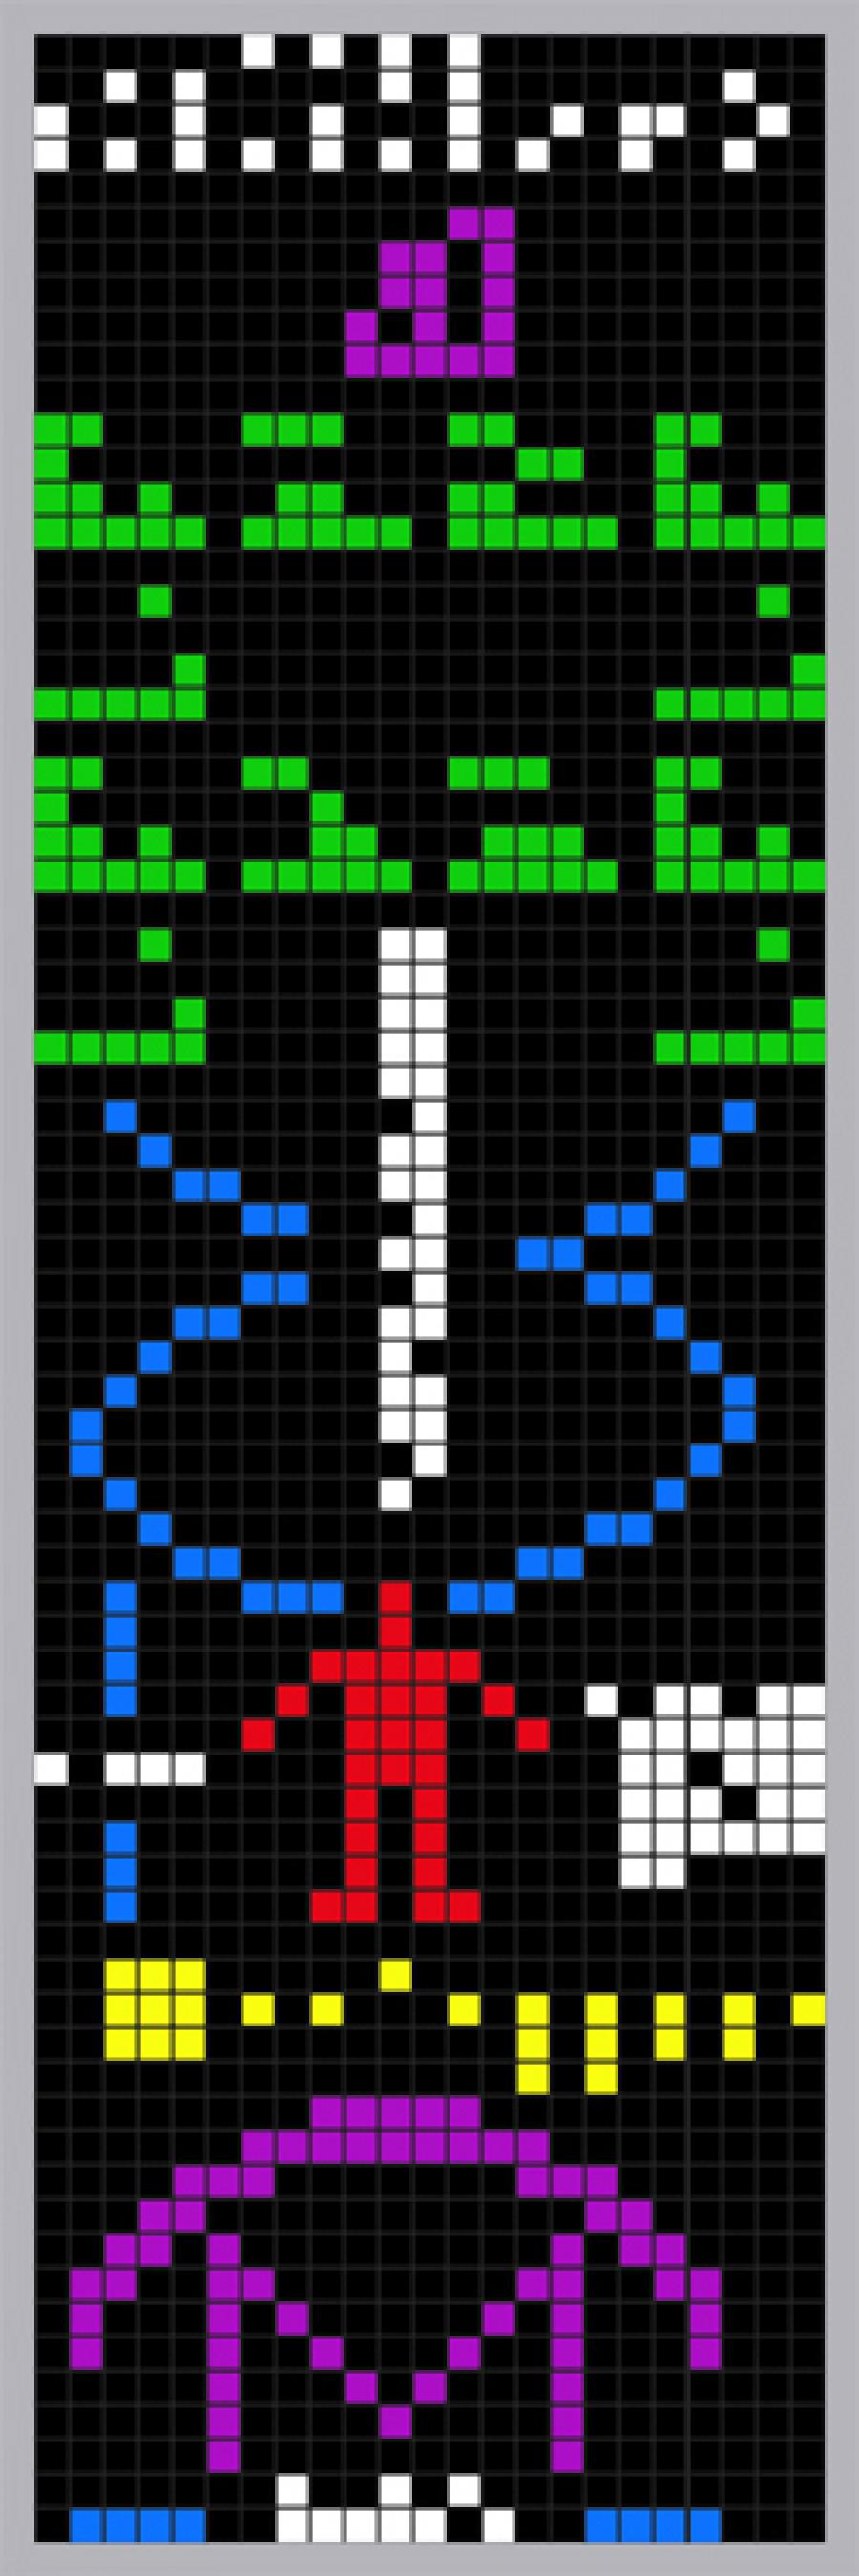 Visual depiction of the Arecibo message